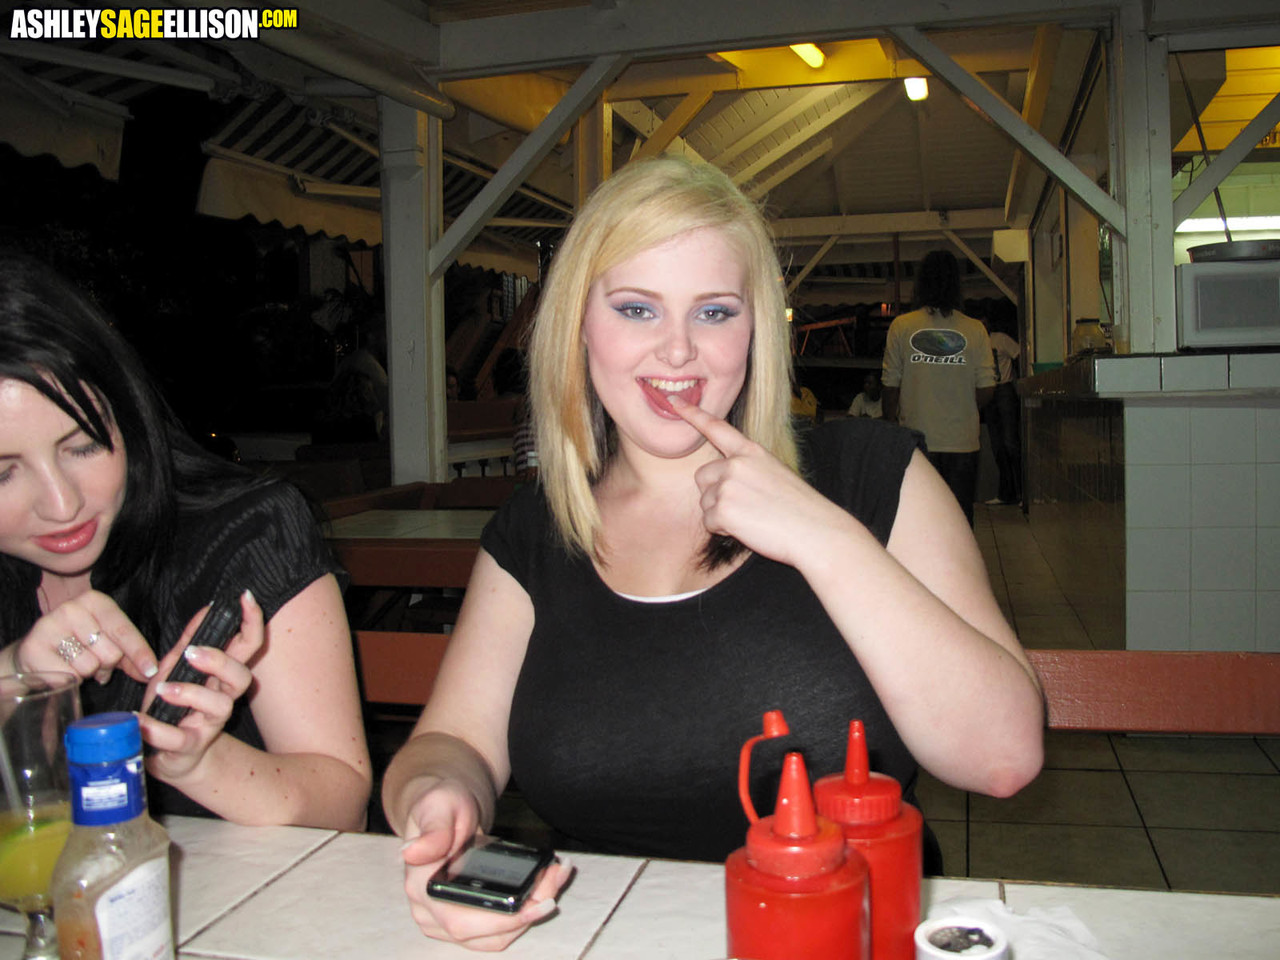 Fat chick Ashley Sage Ellison and her busty gf go out on the town 色情照片 #426376436 | Ashley Sage Ellison Pics, Ashley Sage Ellison, Karina Hart, BBW, 手机色情